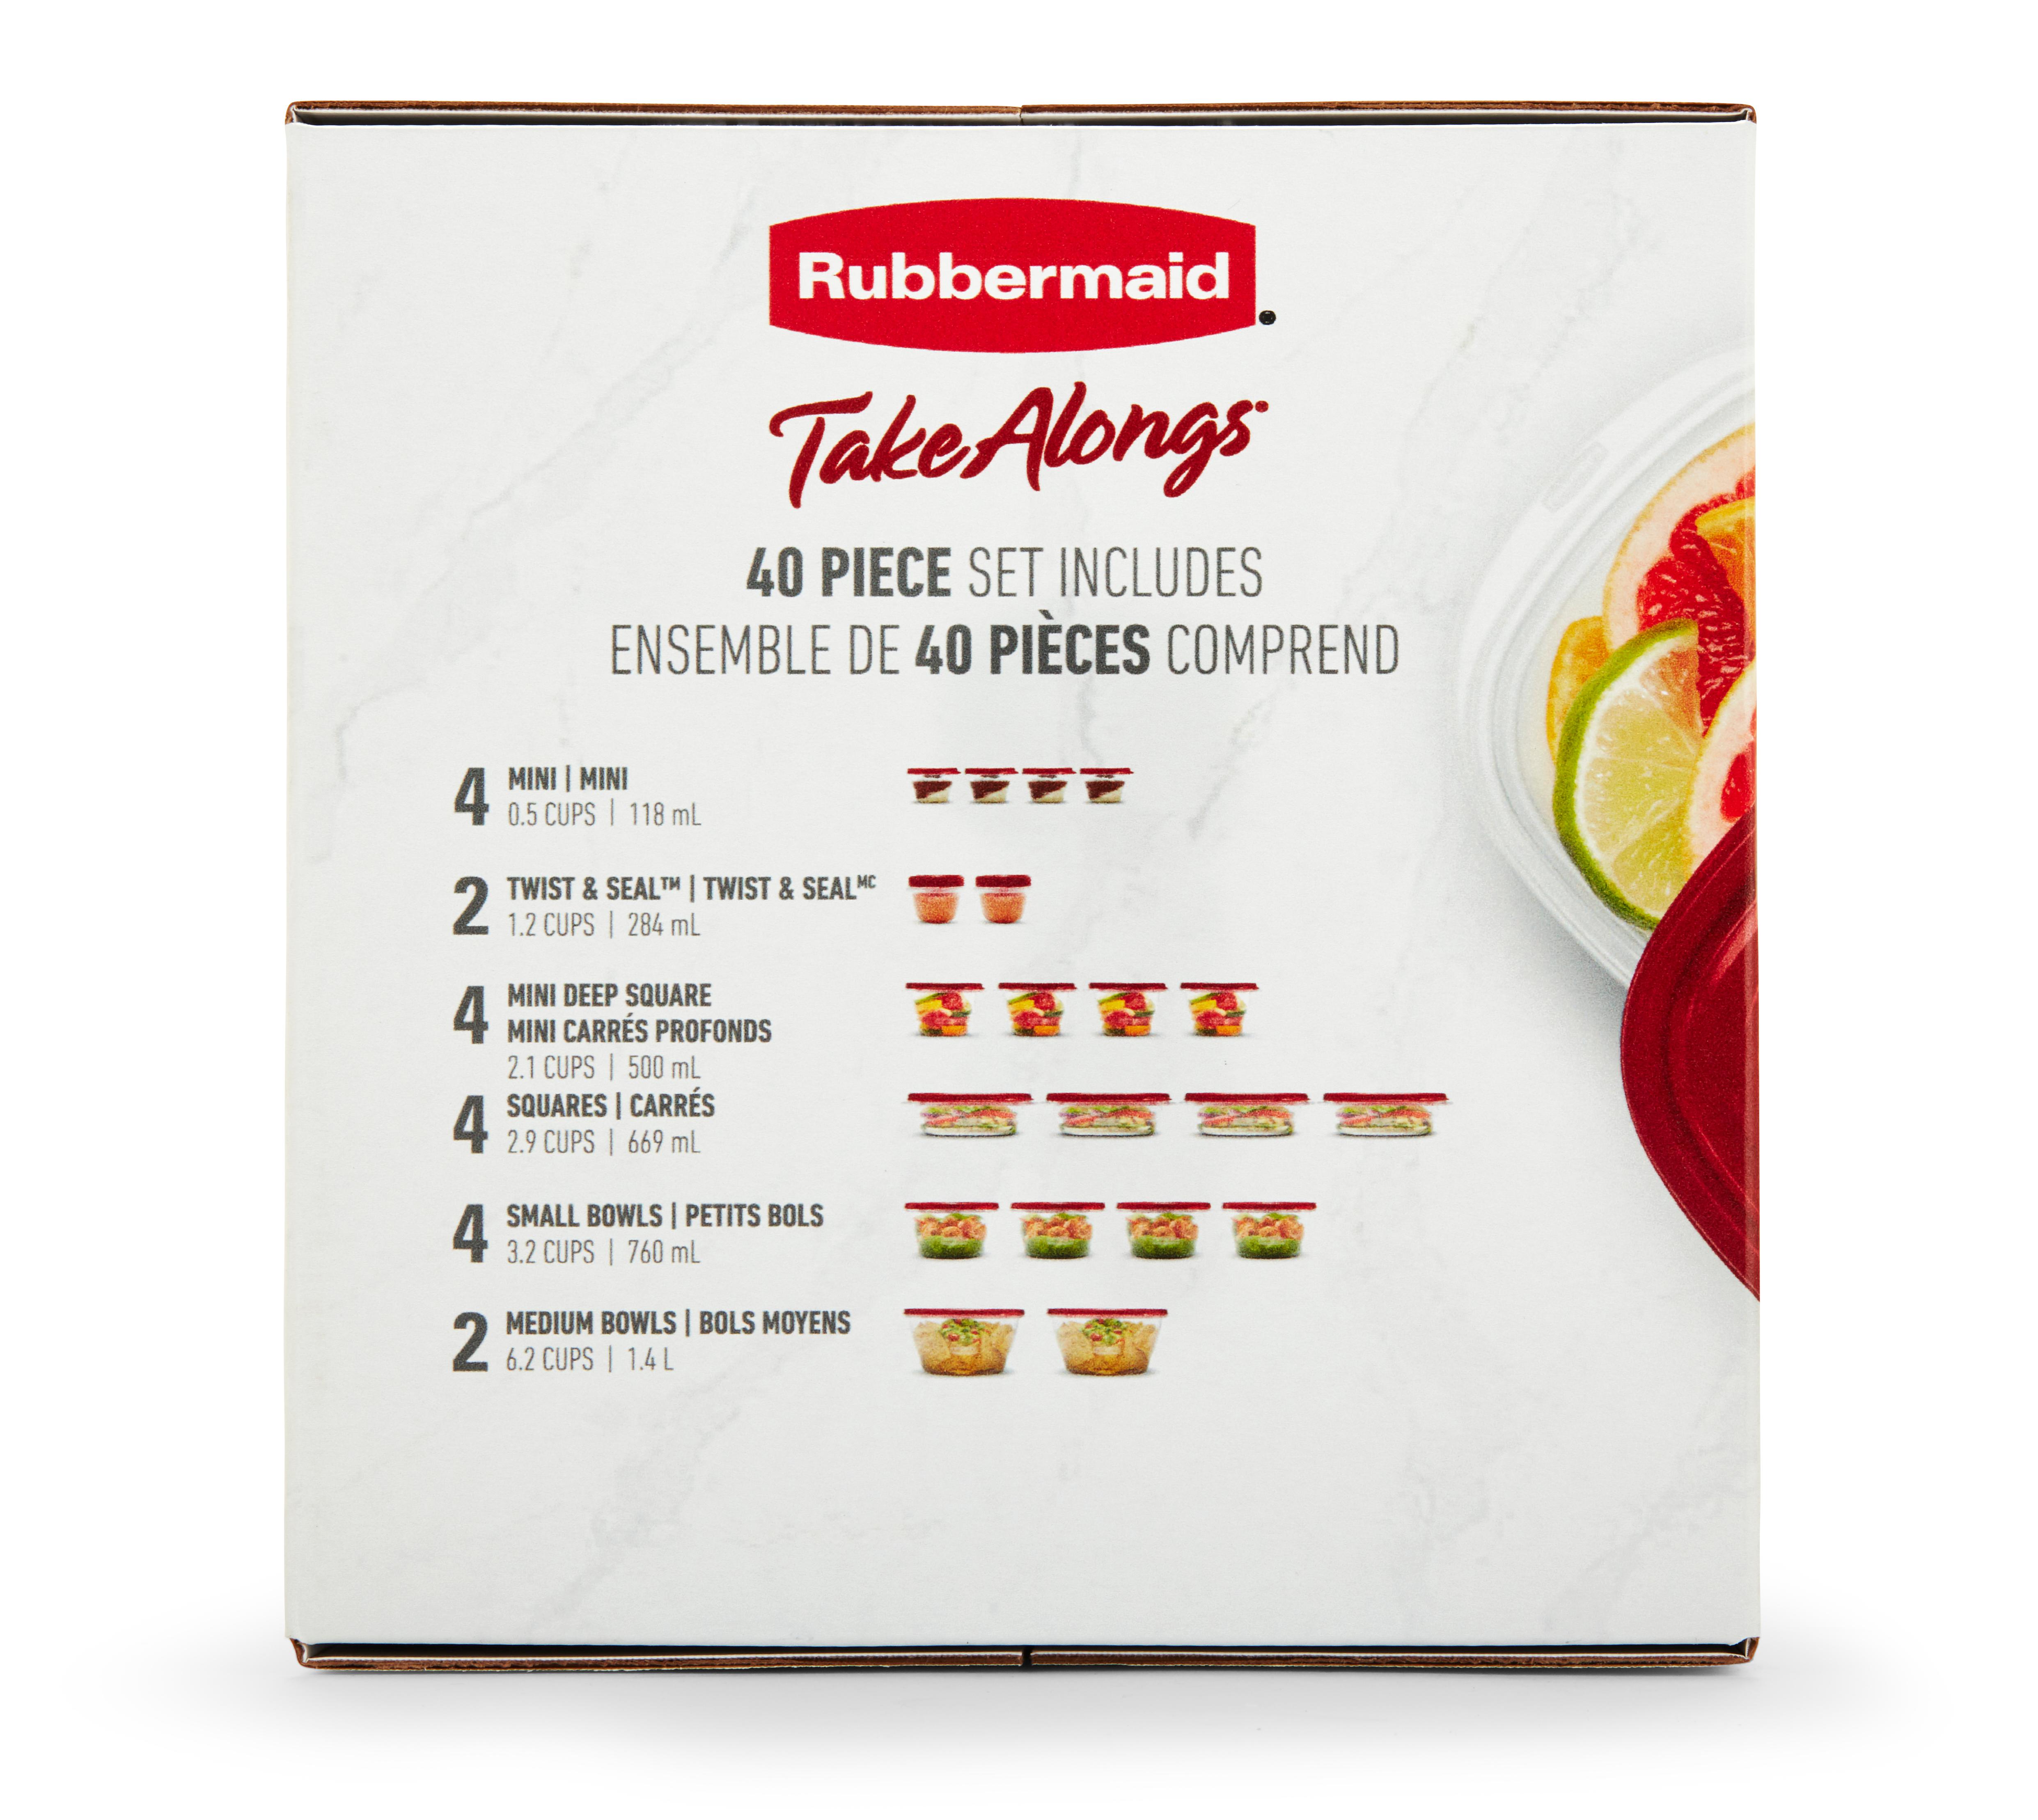 Rubbermaid TakeAlongs Food Storage Containers, Red, 40 Piece Set - image 4 of 9